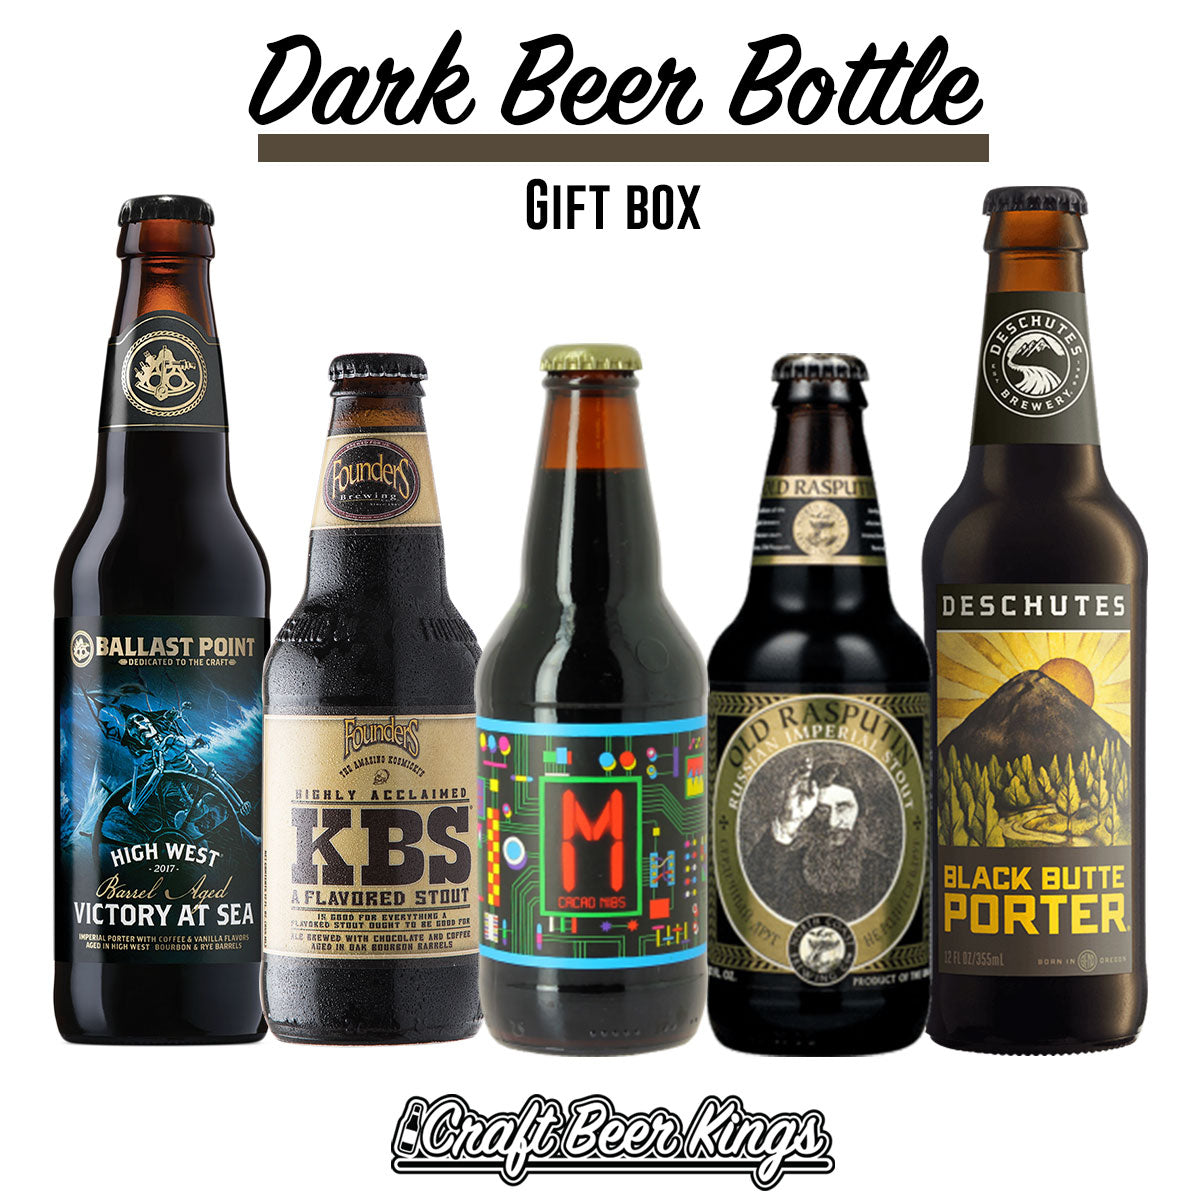 Dark Beers Bottle Gift Box - Shipping Included!